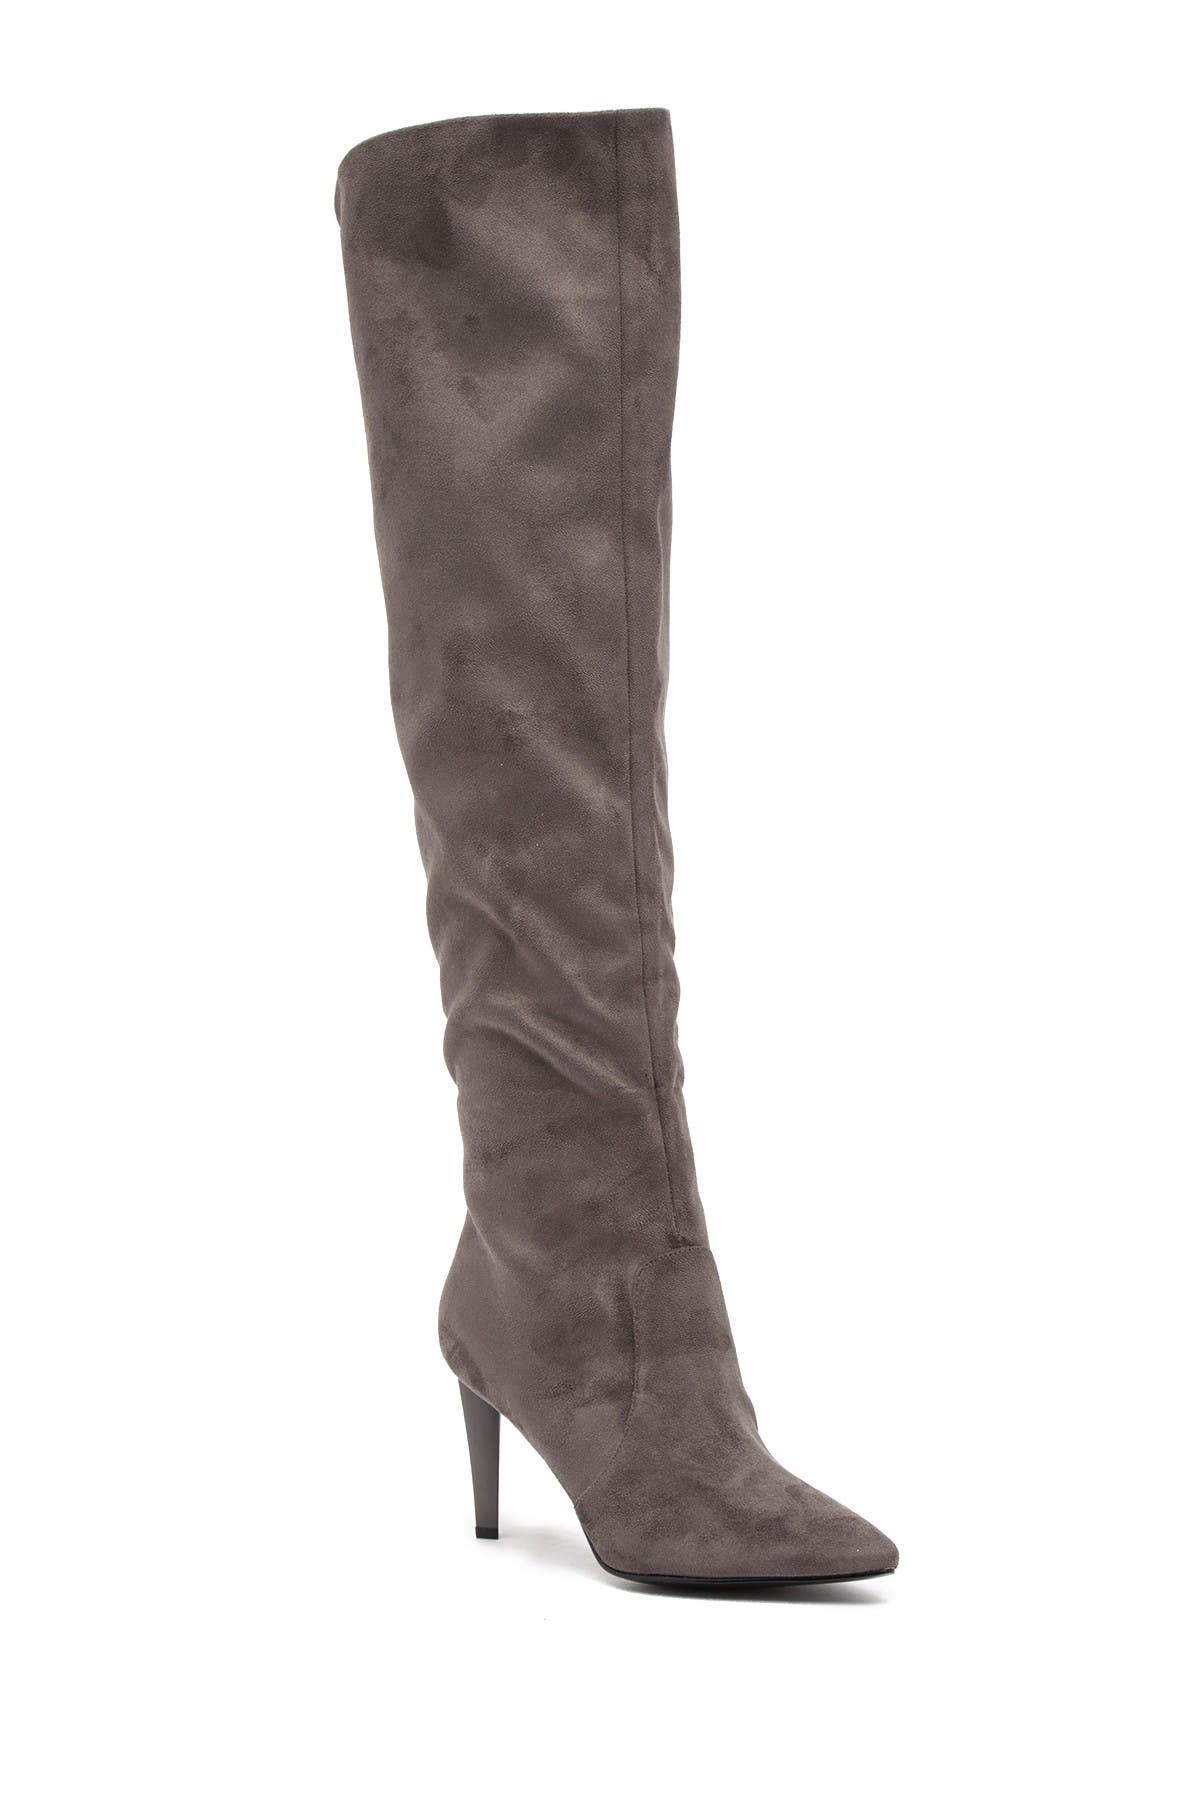 kendall and kylie boots nordstrom